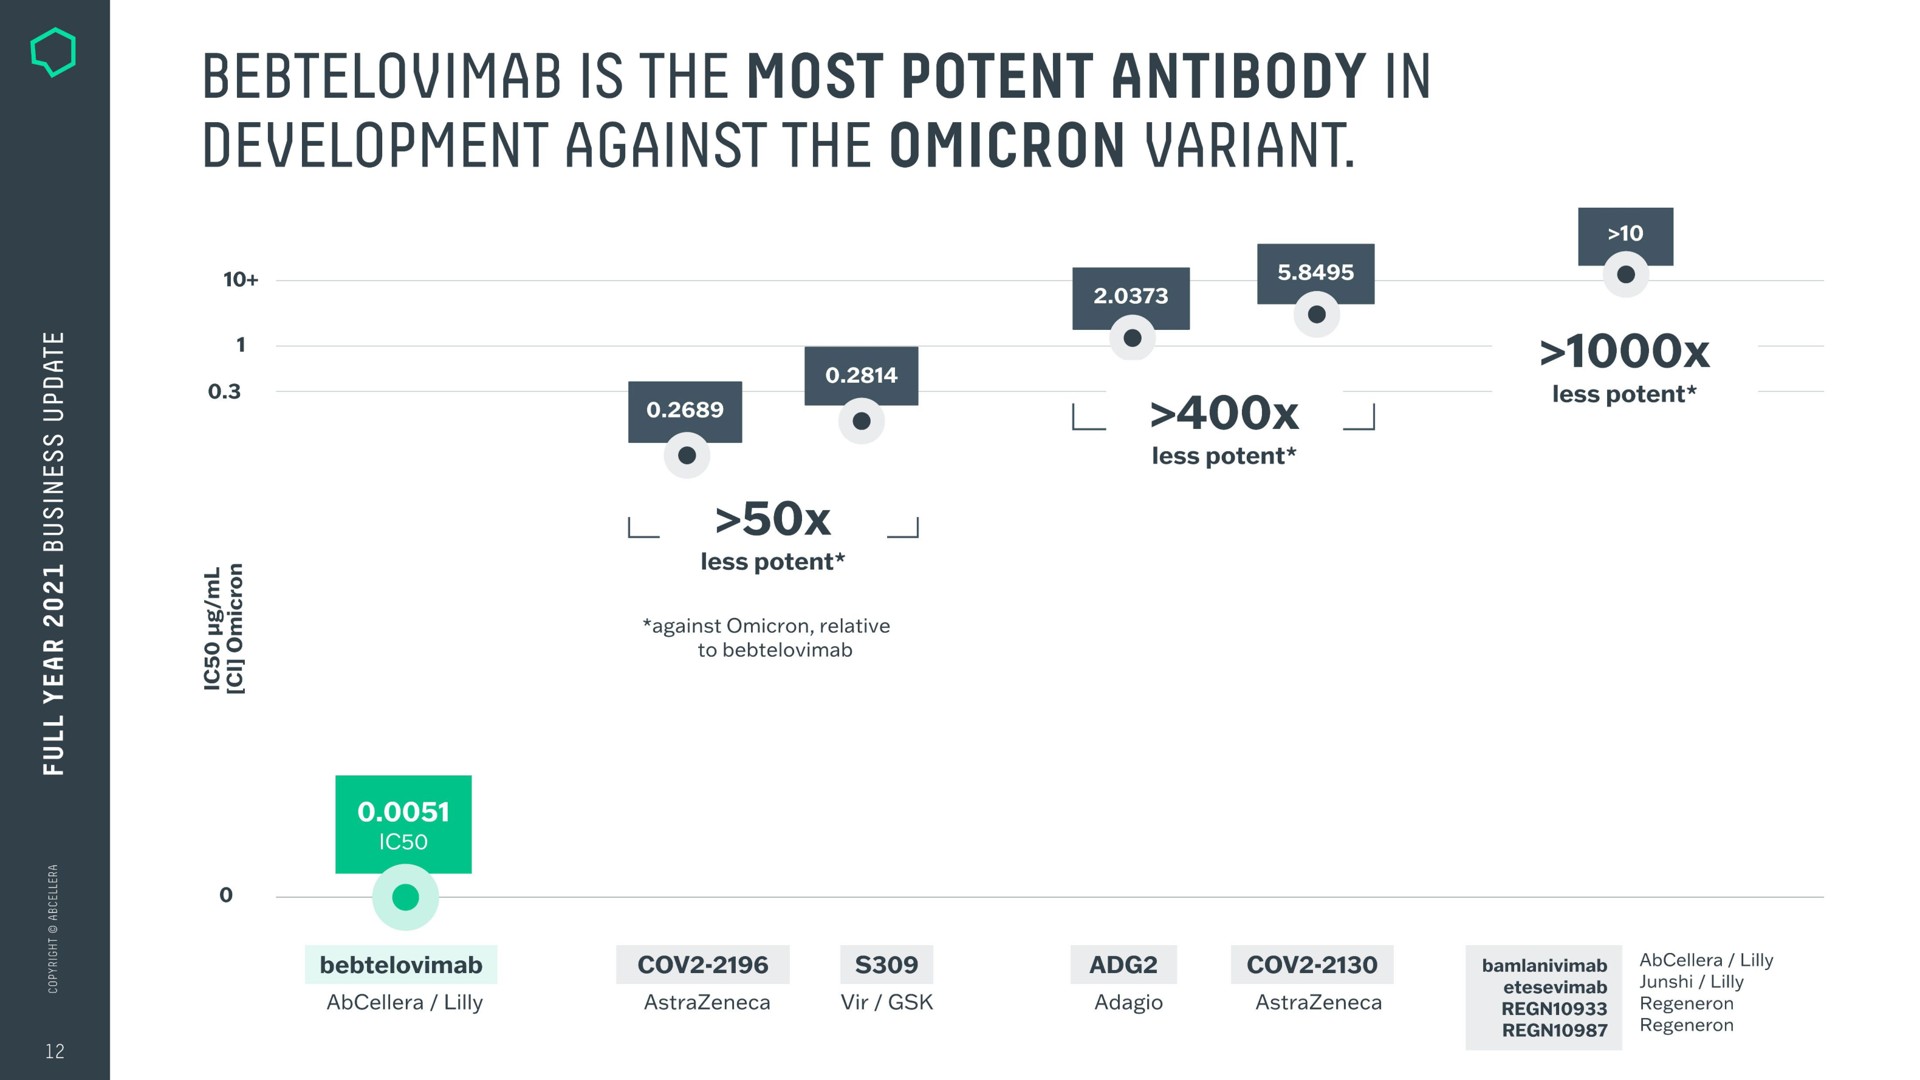 is the most potent antibody in development against the omicron variant | AbCellera